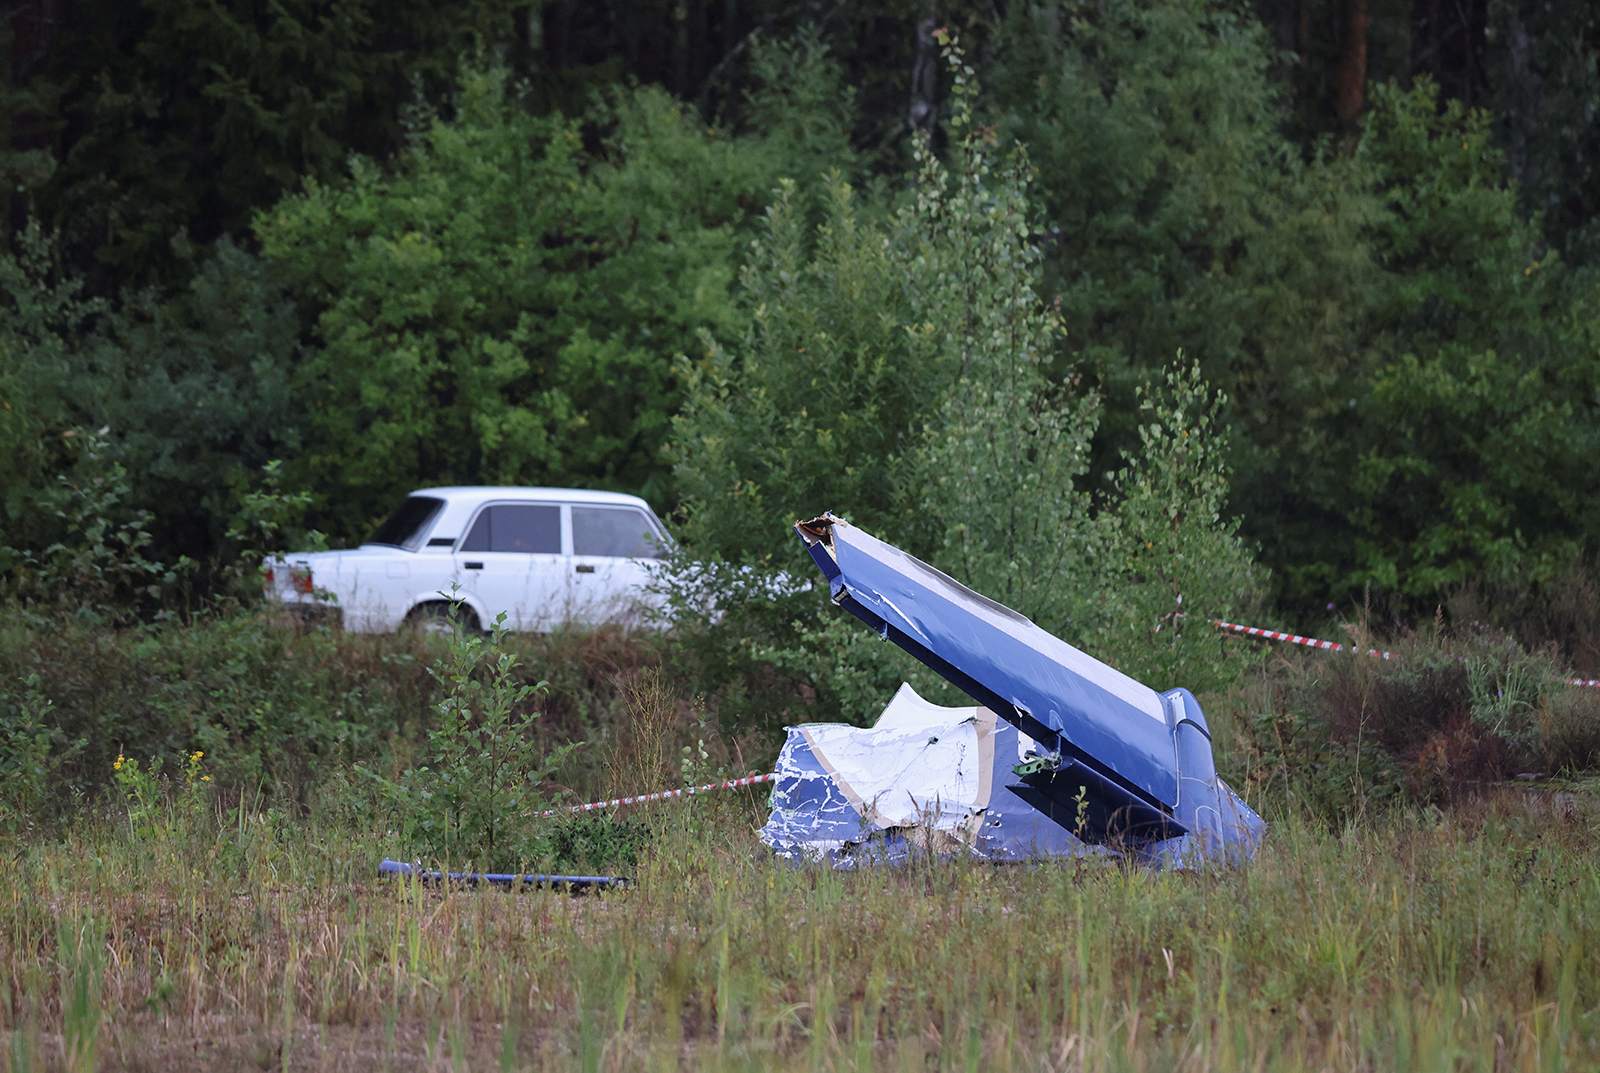 Wreckage is seen near the crash site in the Tver region, Russia, on August 24.